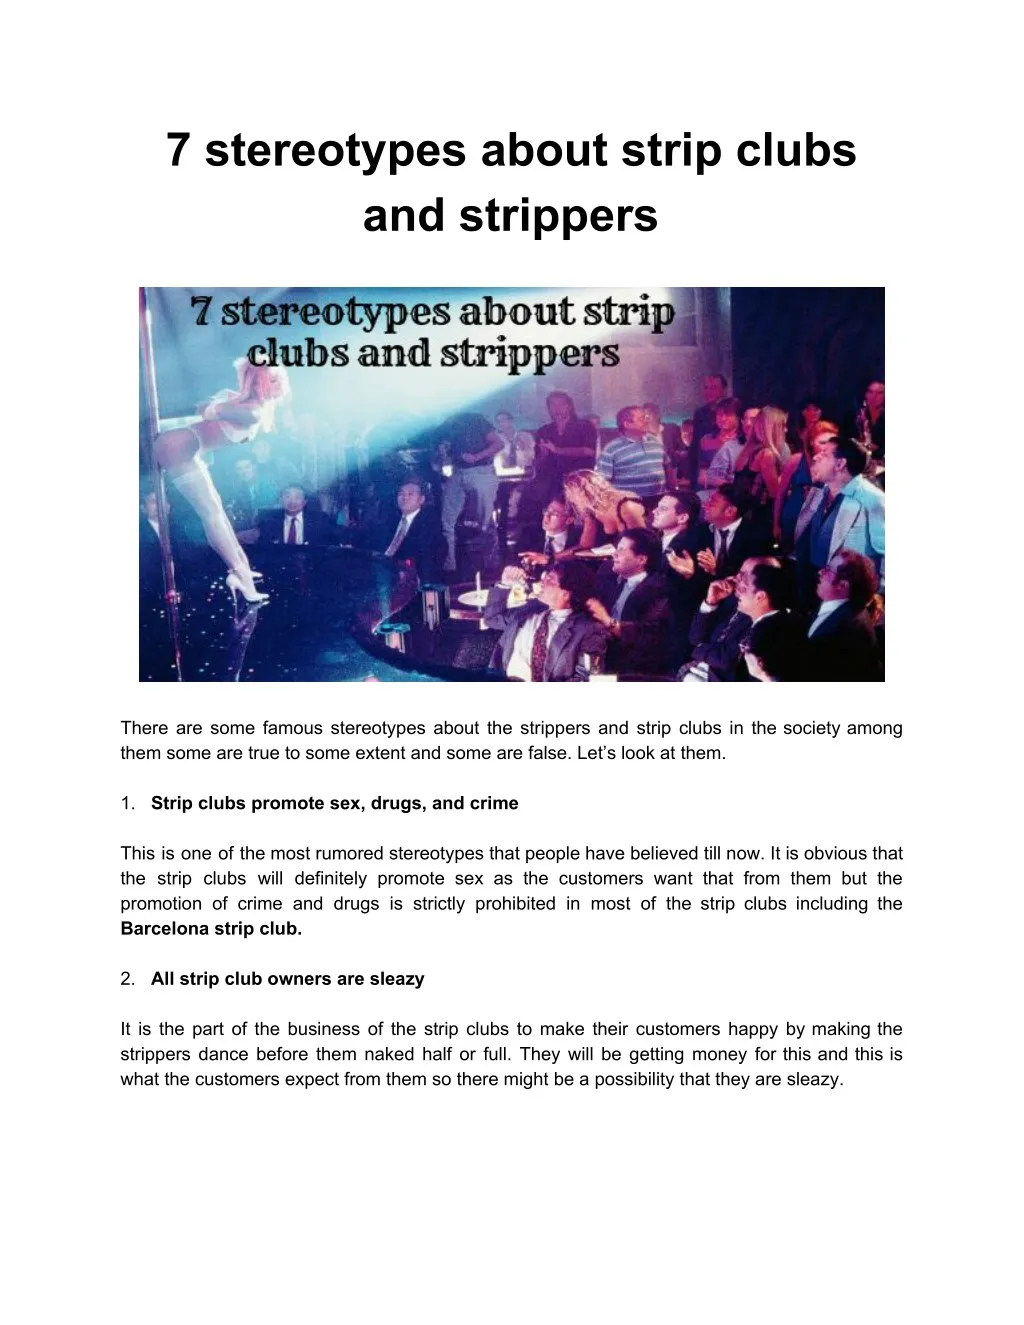 7 stereotypes about strip clubs and strippers